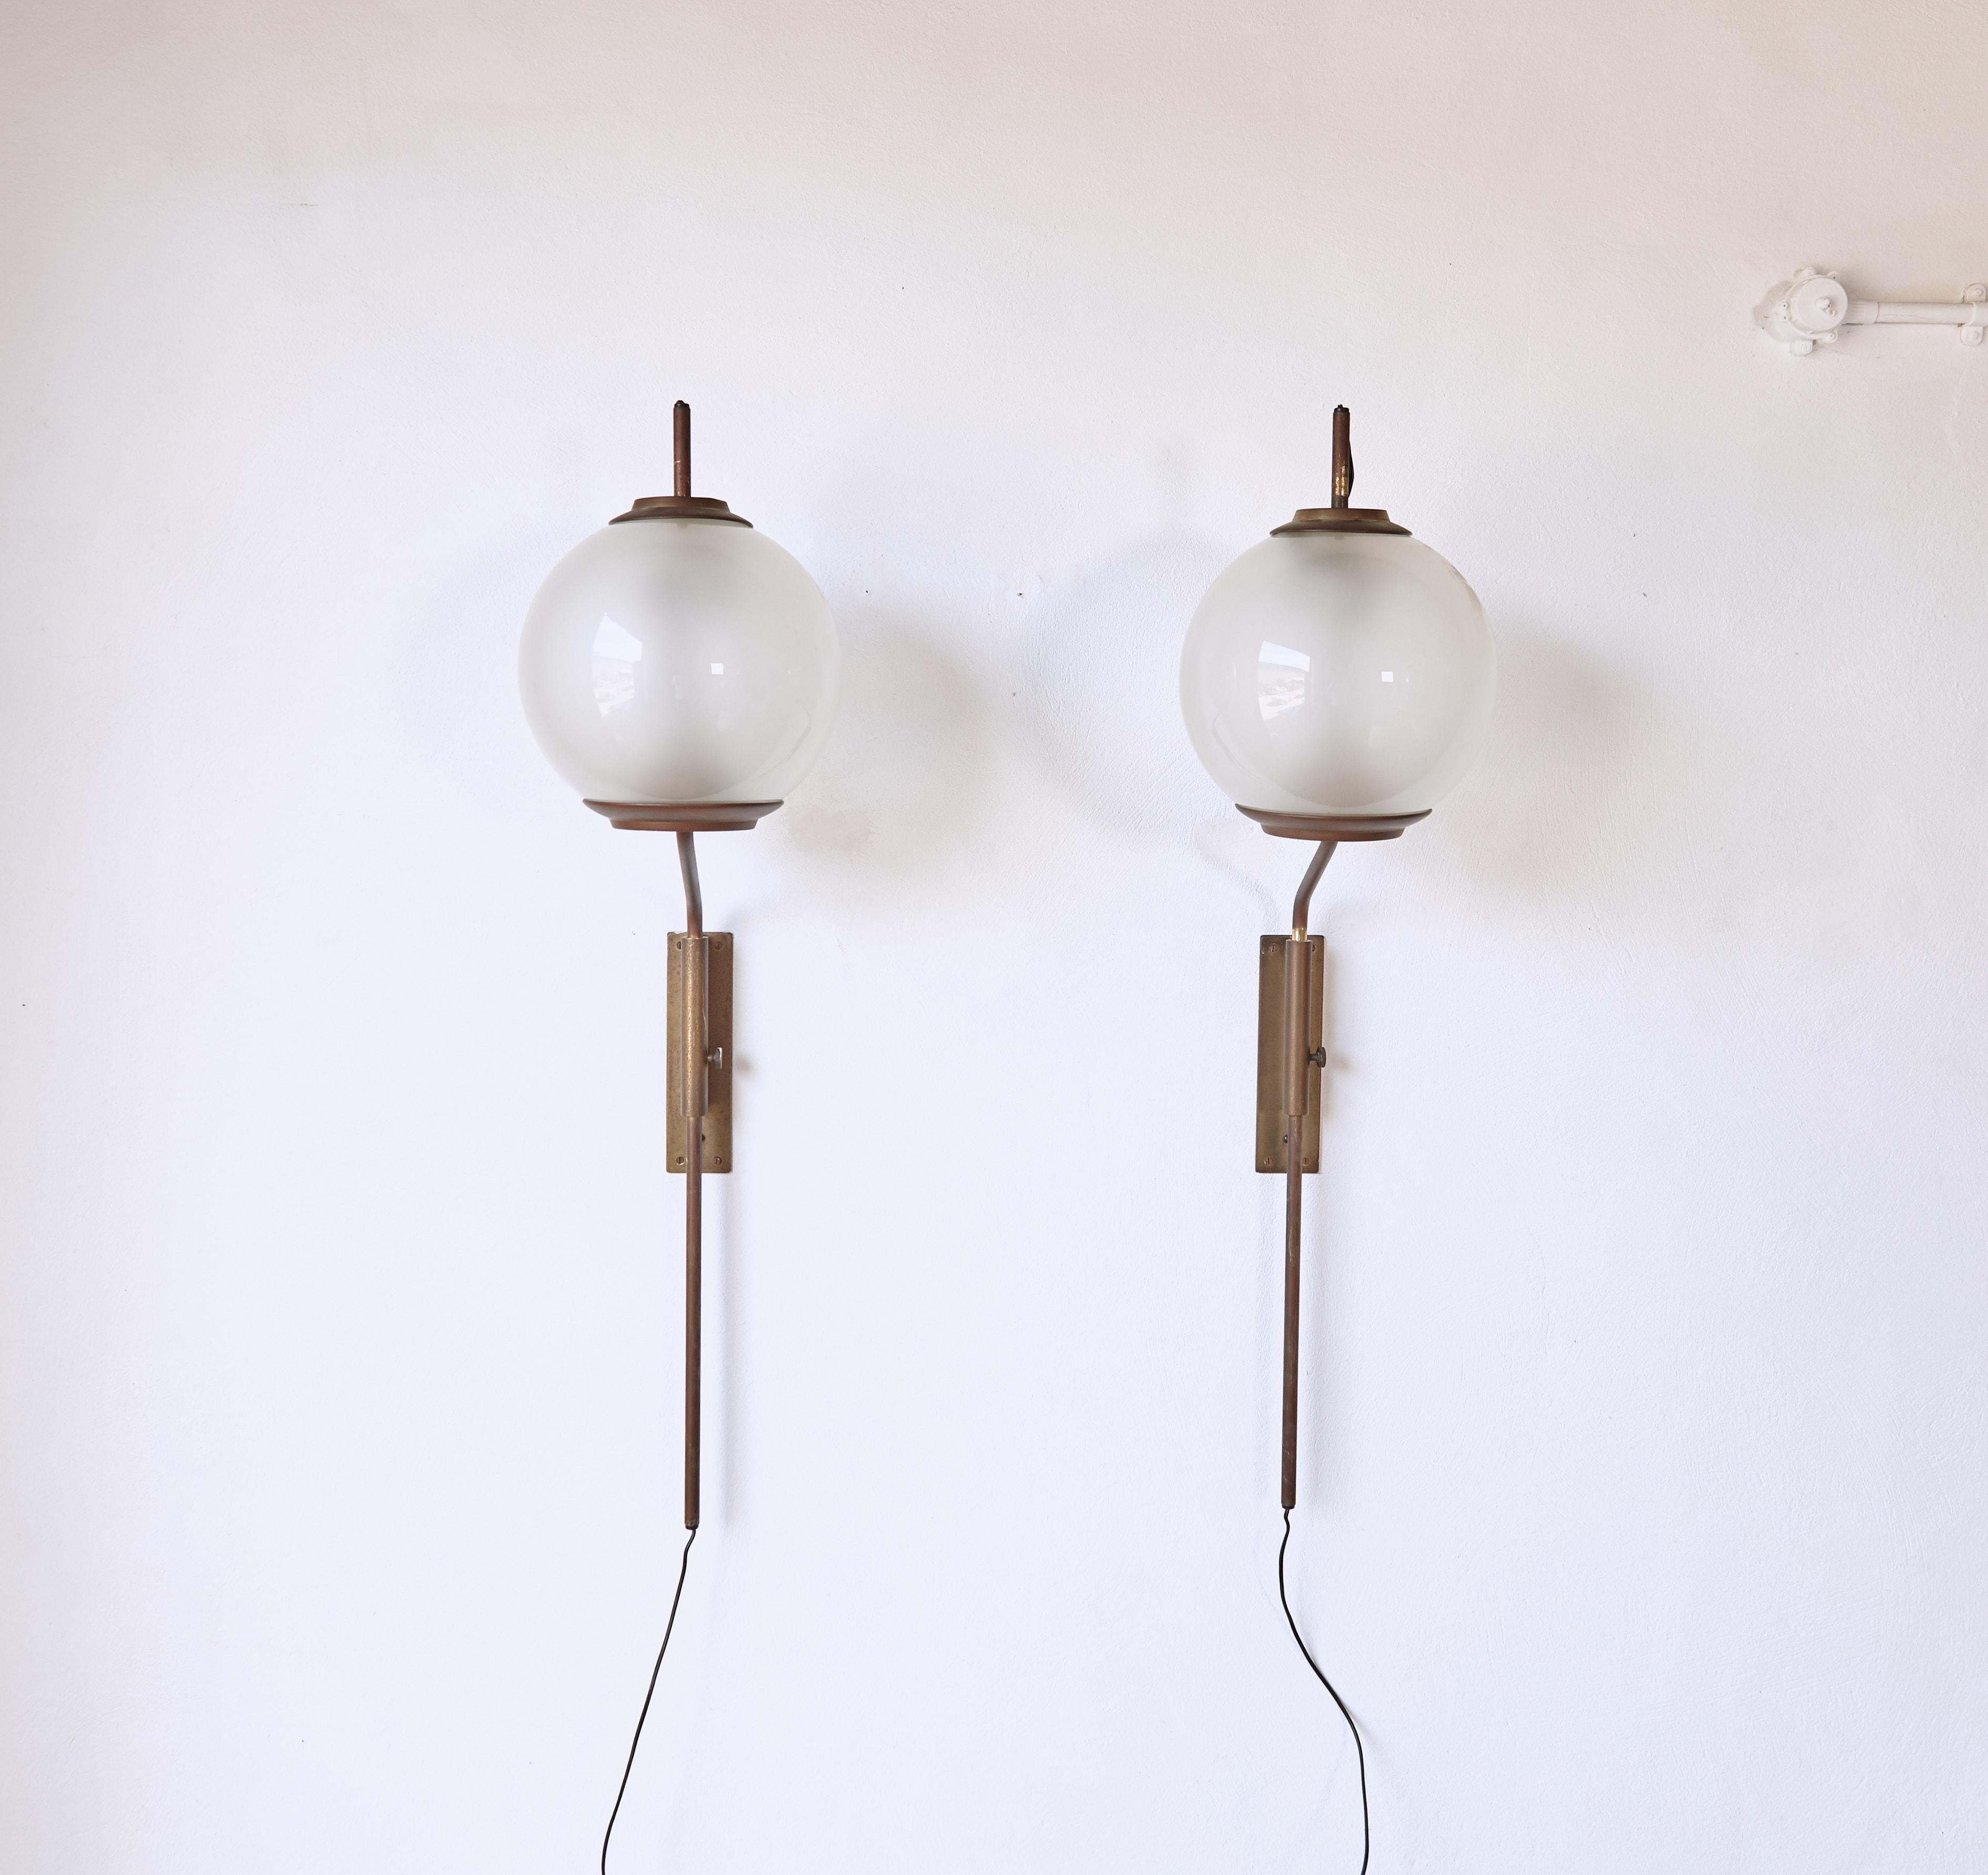 An elegant original pair of Luigi Caccia Dominioni LP11 / Pallone Wall Lamps, made by Azucena, Italy, in the 1950s.  Brass frame and opaline glass shade.  It is possible to adjust the lamp arms up and down and left to right.   In good original